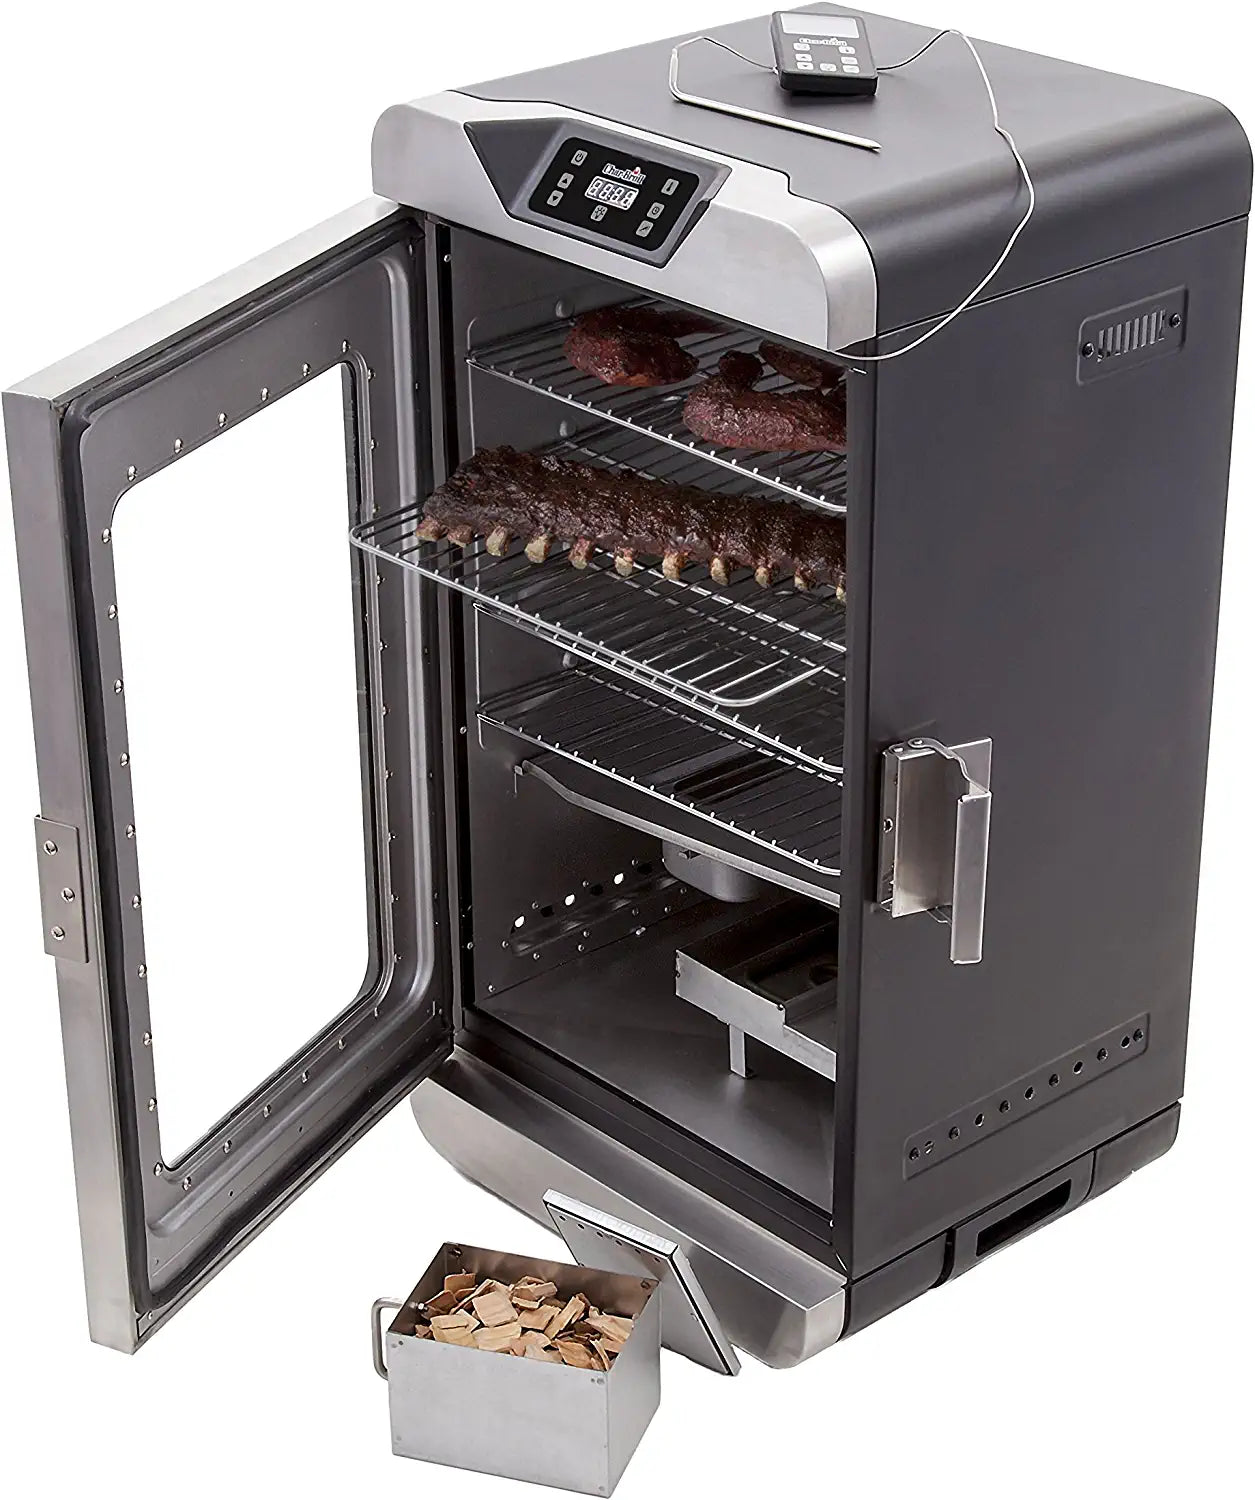 Char-Broil 17202004 Digital Electric Smoker, Deluxe, Silver